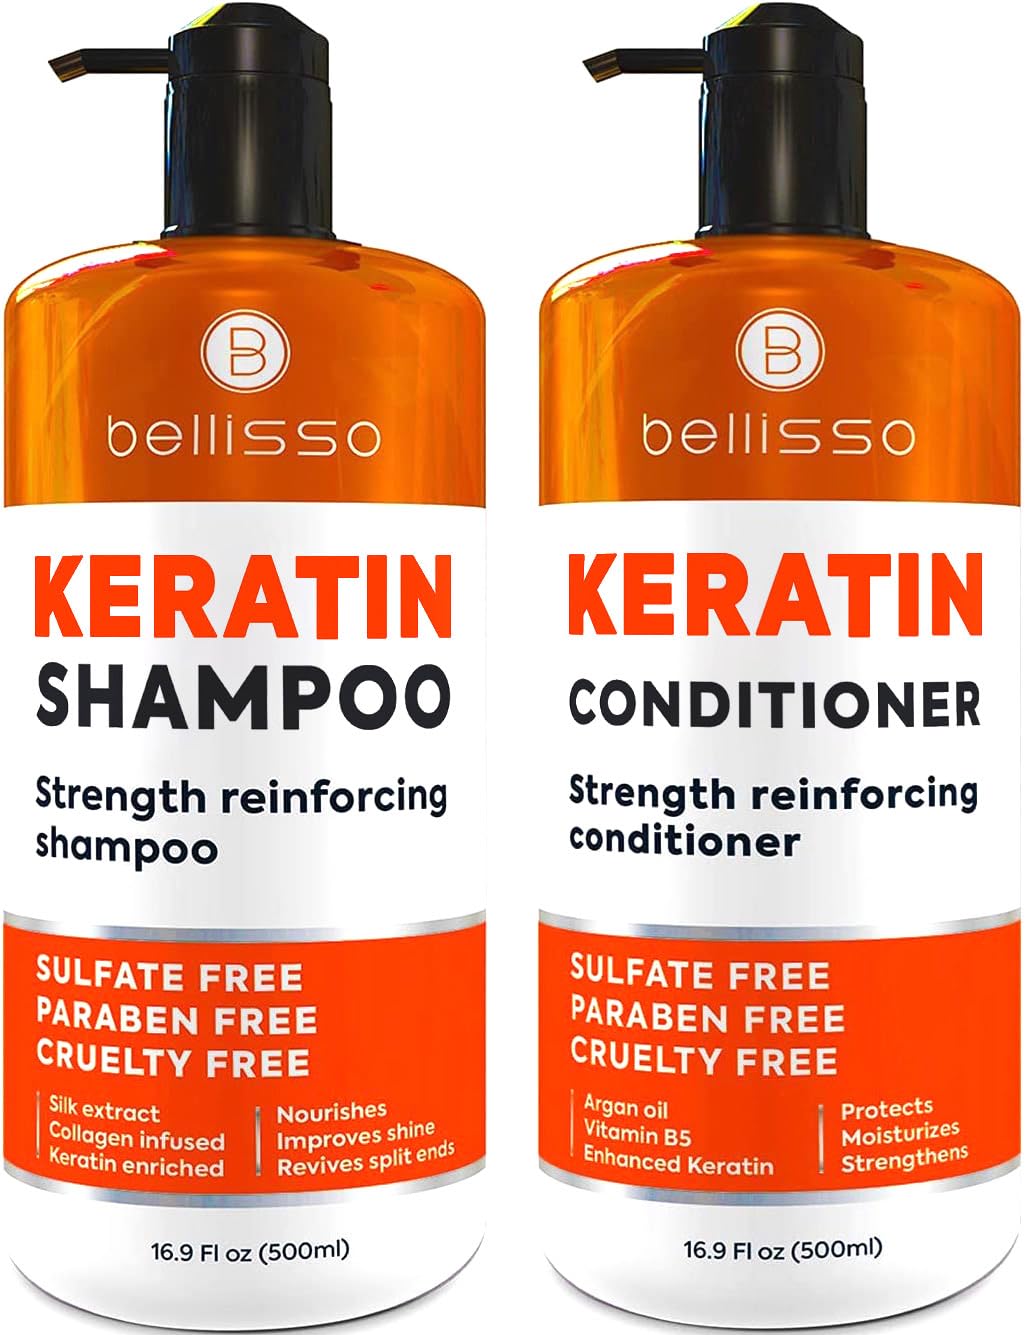 I've been looking to make better choices lately at what I'm putting in and on my body. I did research and decided to go with this shampoo and conditioner, and I'm SO glad I did! It's paraben and sulfate free, which is what I was looking for. And it doesn't test on animals! A win-win!I saw one review that referenced someone thinking it didn't get sudsy enough I don't think I've ever had a shampoo suds up so much! It's almost too much! LOLYou don't need a lot of shampoo either!The conditioner lea